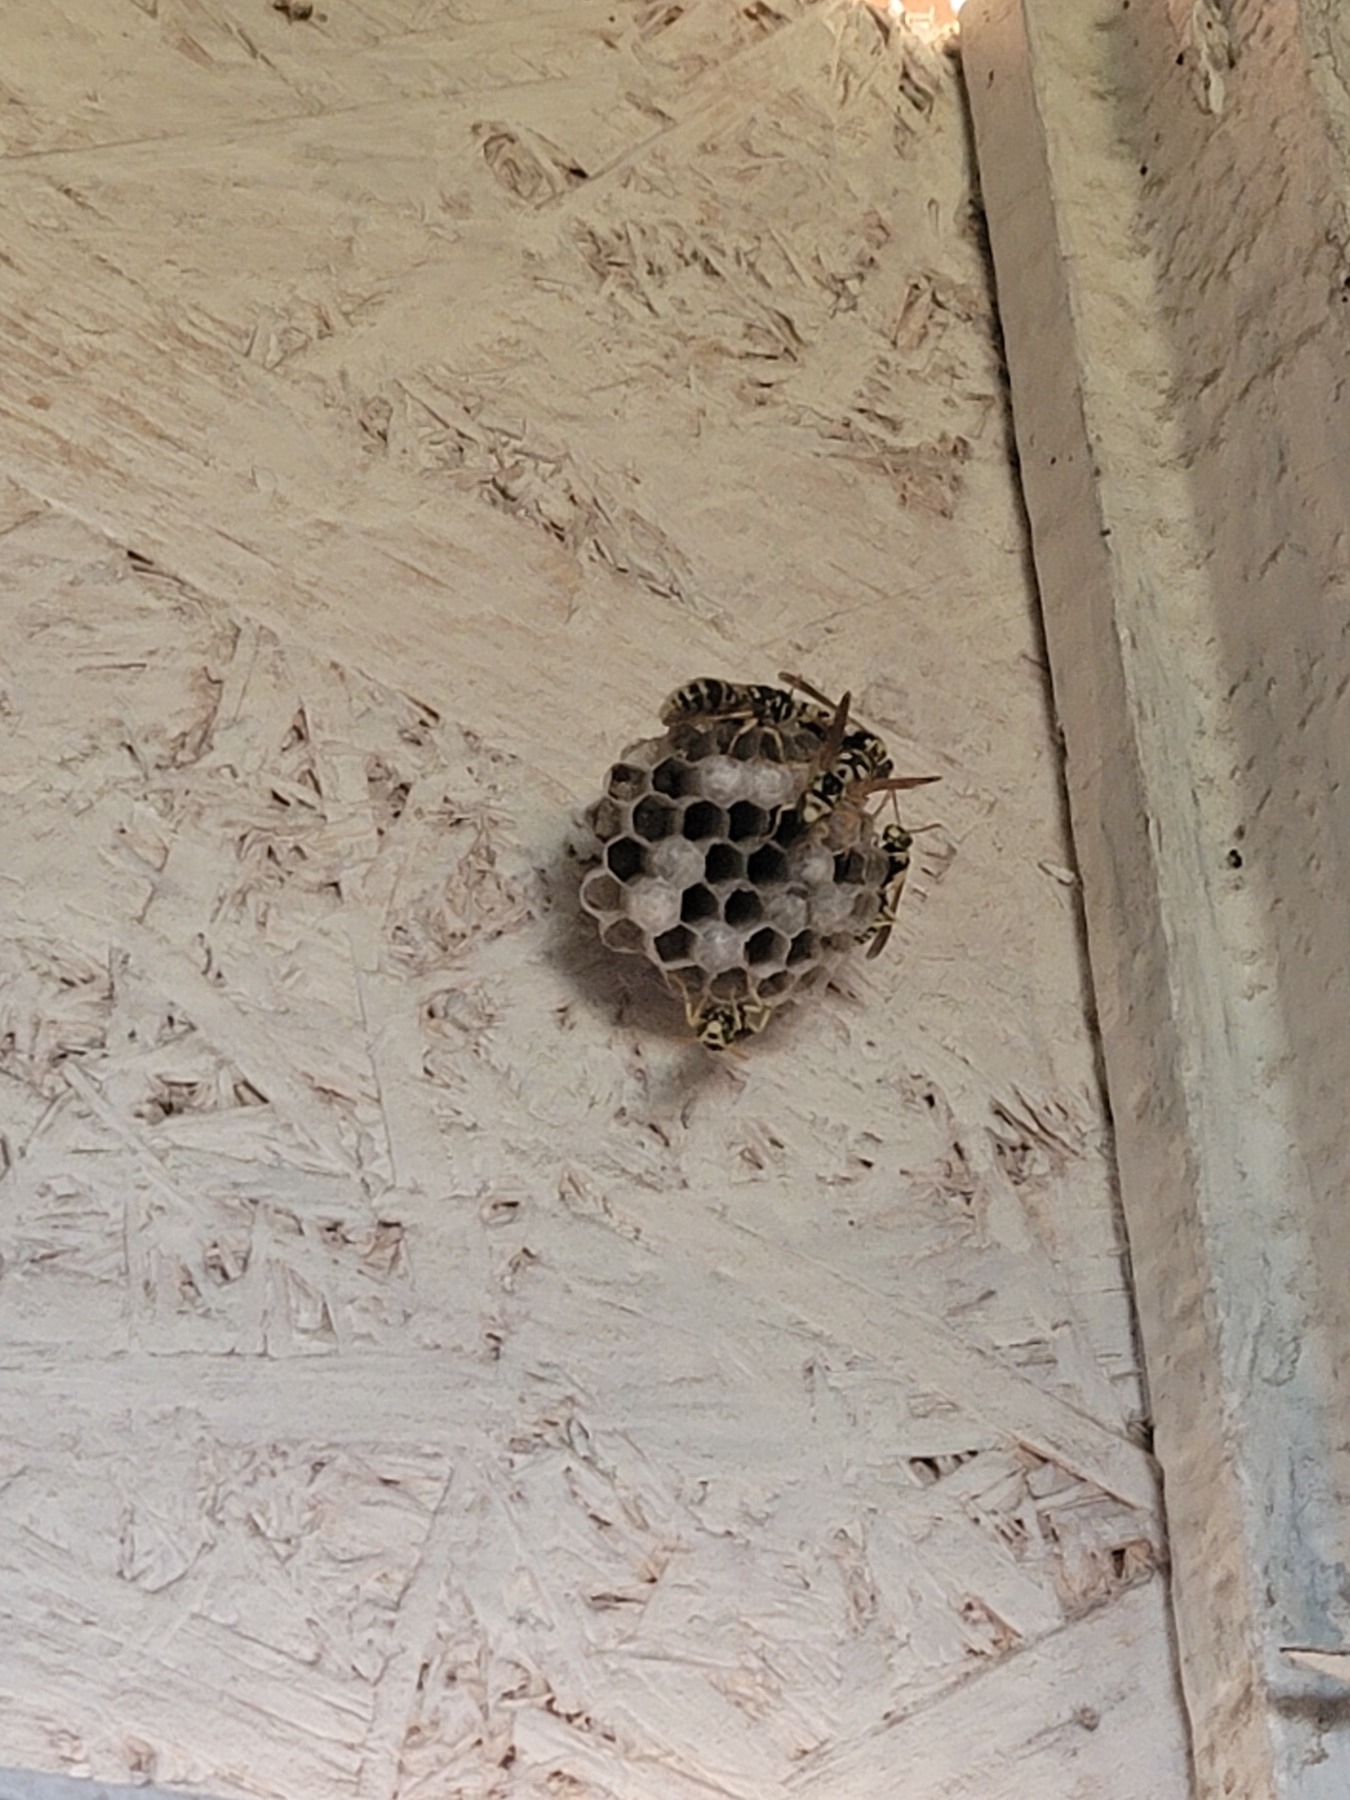 wasp nest with about 5 wasps visible on a white wooden wall